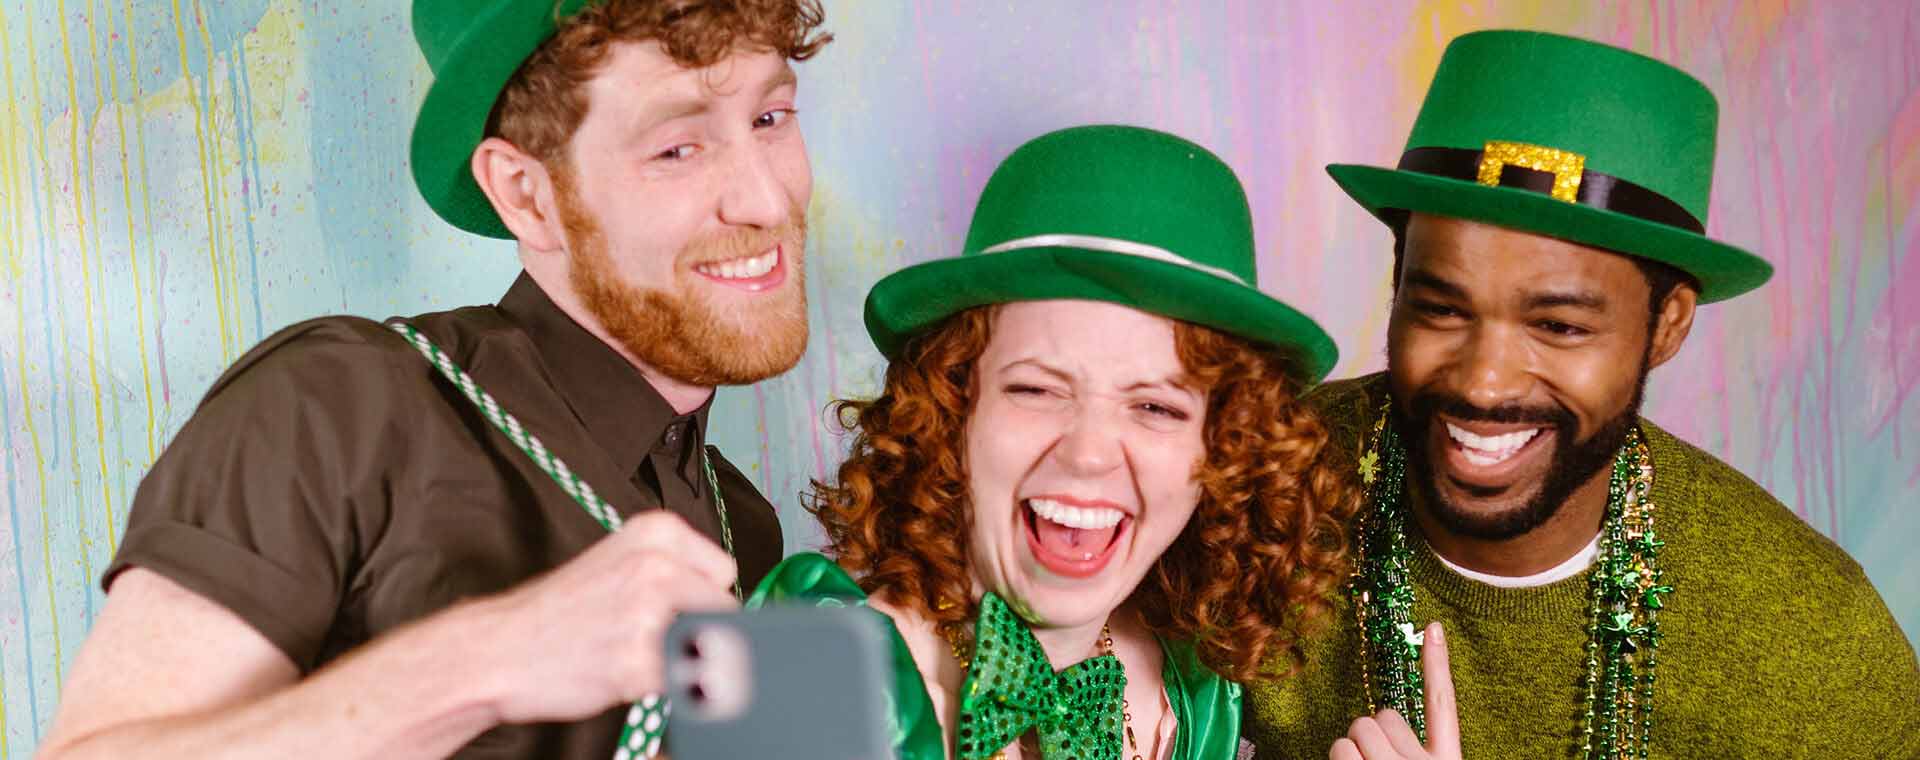 How to say ‘Happy St. Patrick’s Day’ in Irish